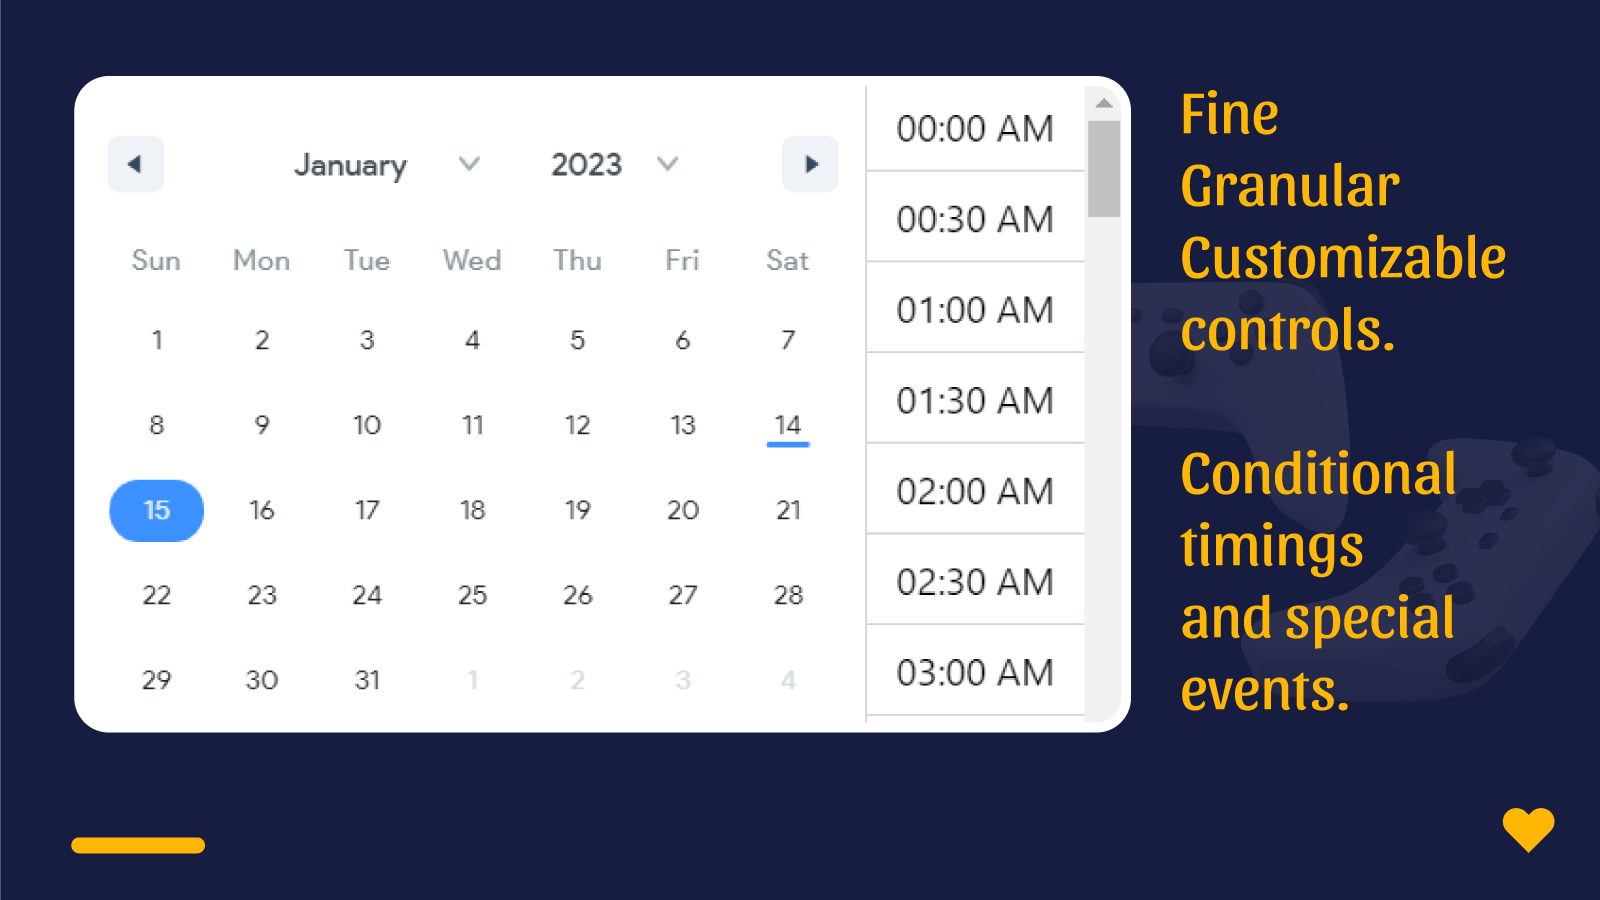 granular controls over time and special events